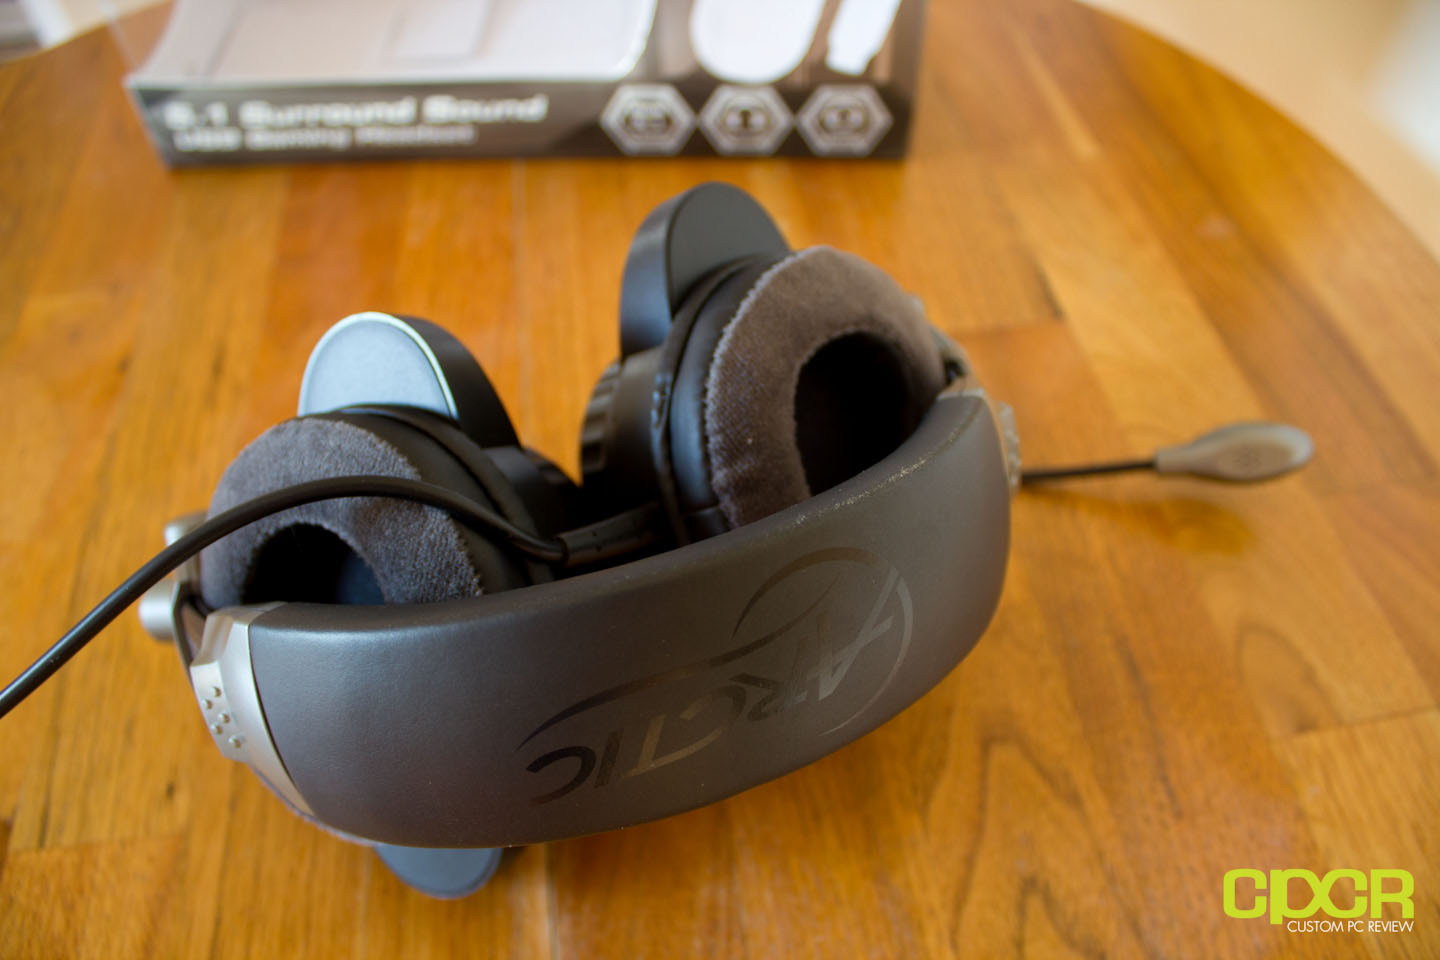 ARCTIC Sound P531 5.1 Surround Sound Gaming Headset Review